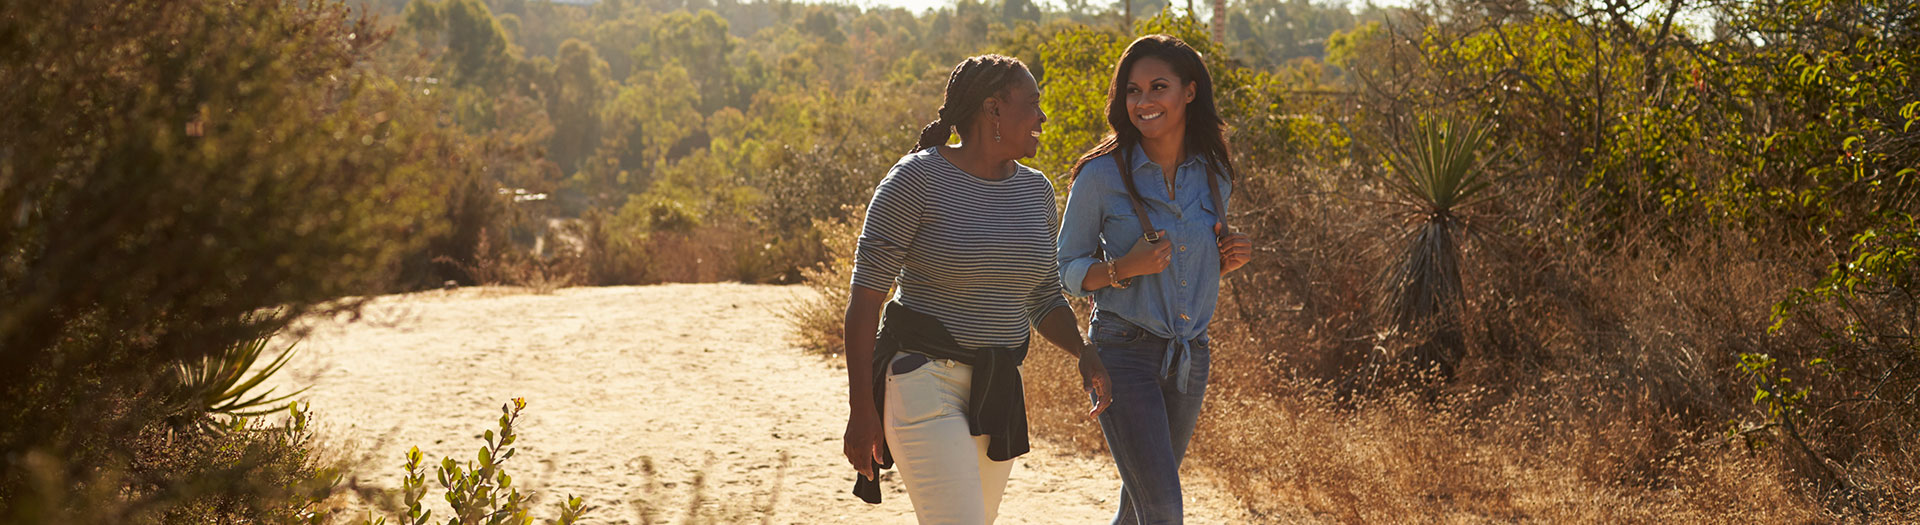 two women walking and smiling on hiking trail.